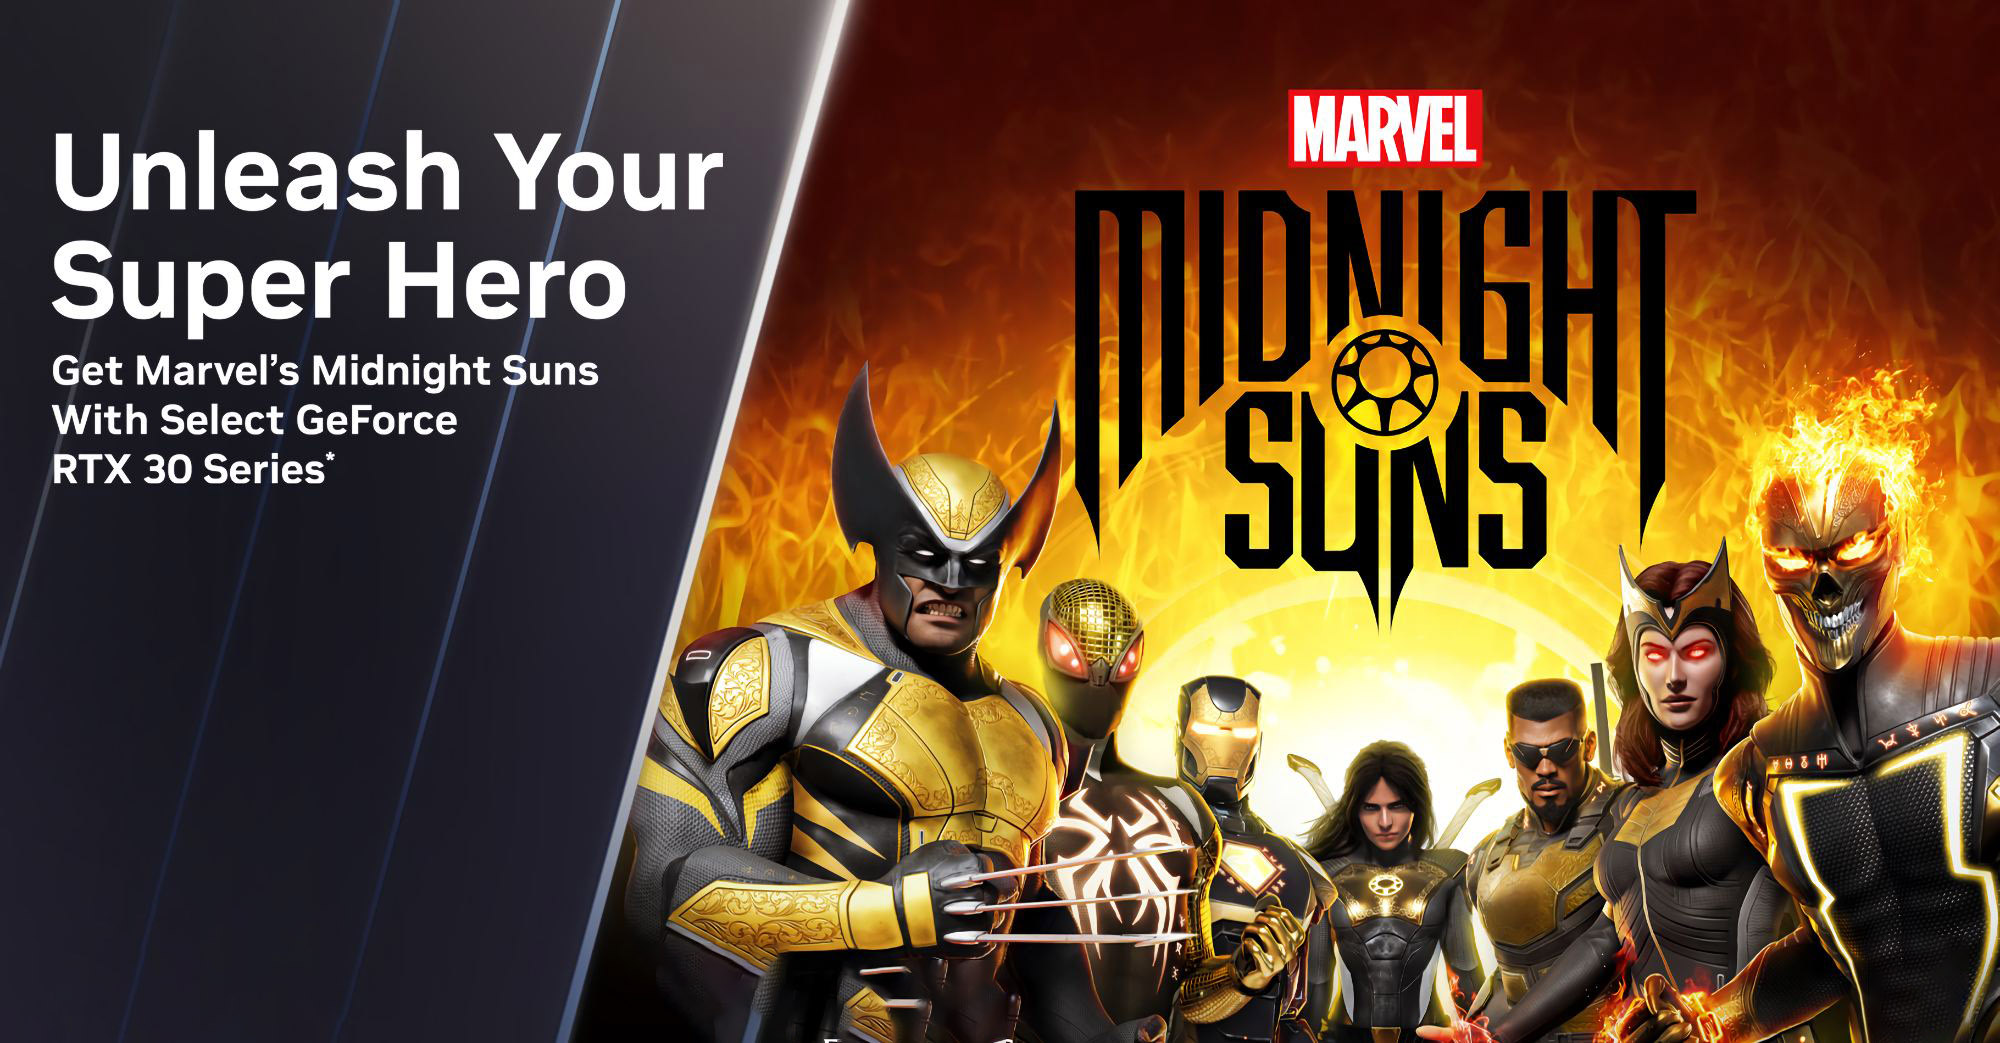 Marvel's Midnight Suns has been delayed again